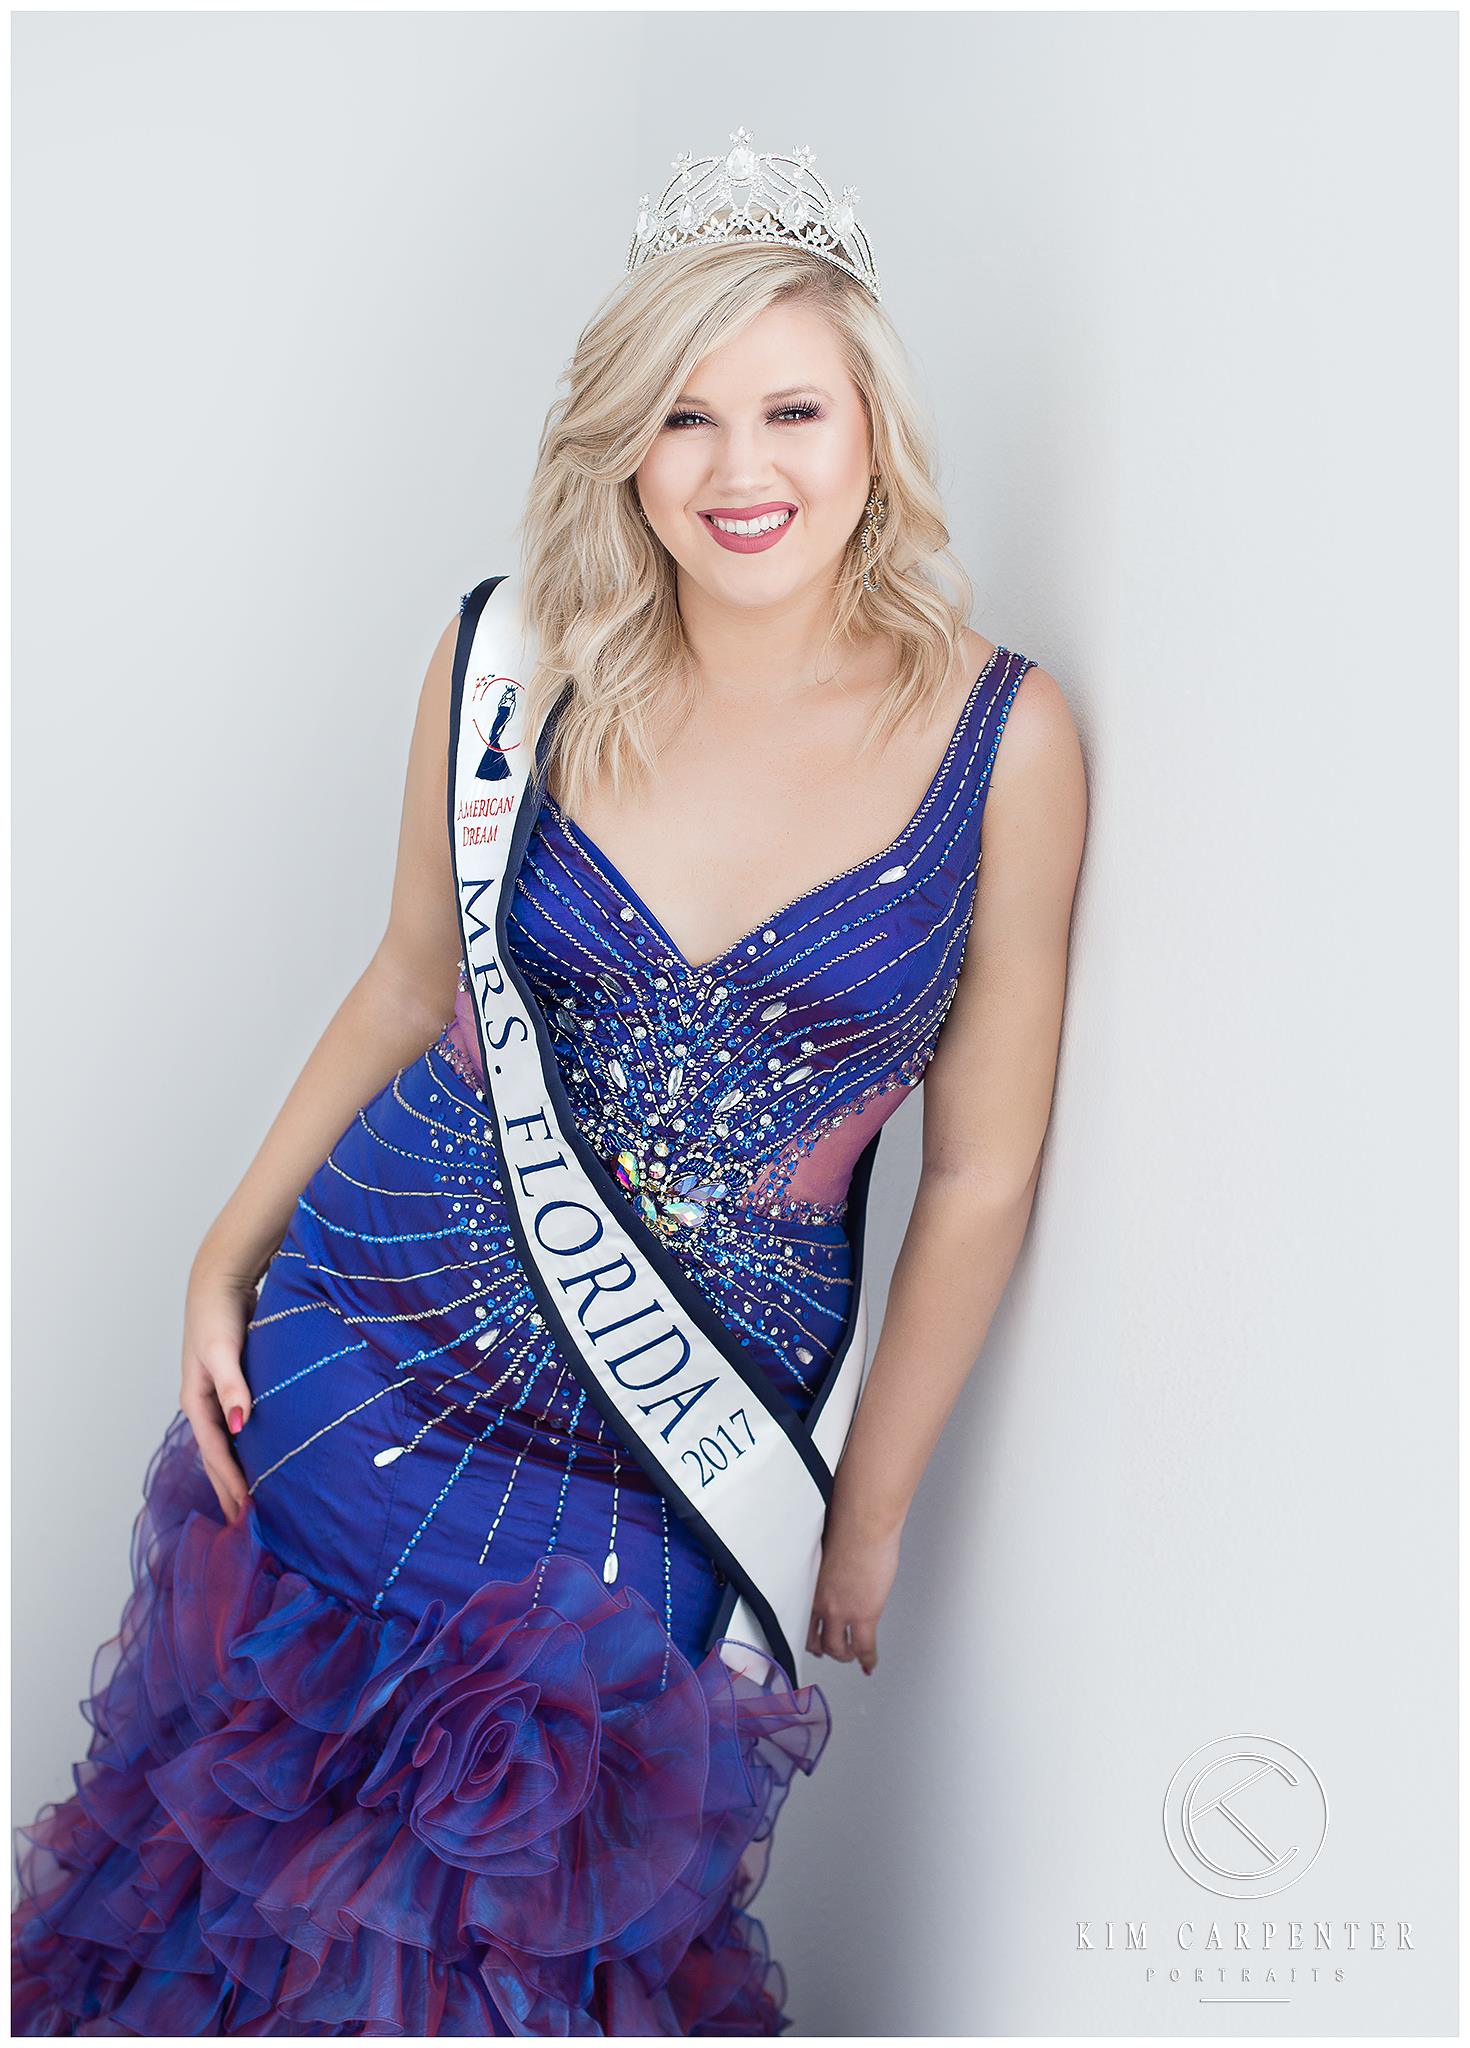 Woman wearing blue dress and sash that says Mrs. Florida.